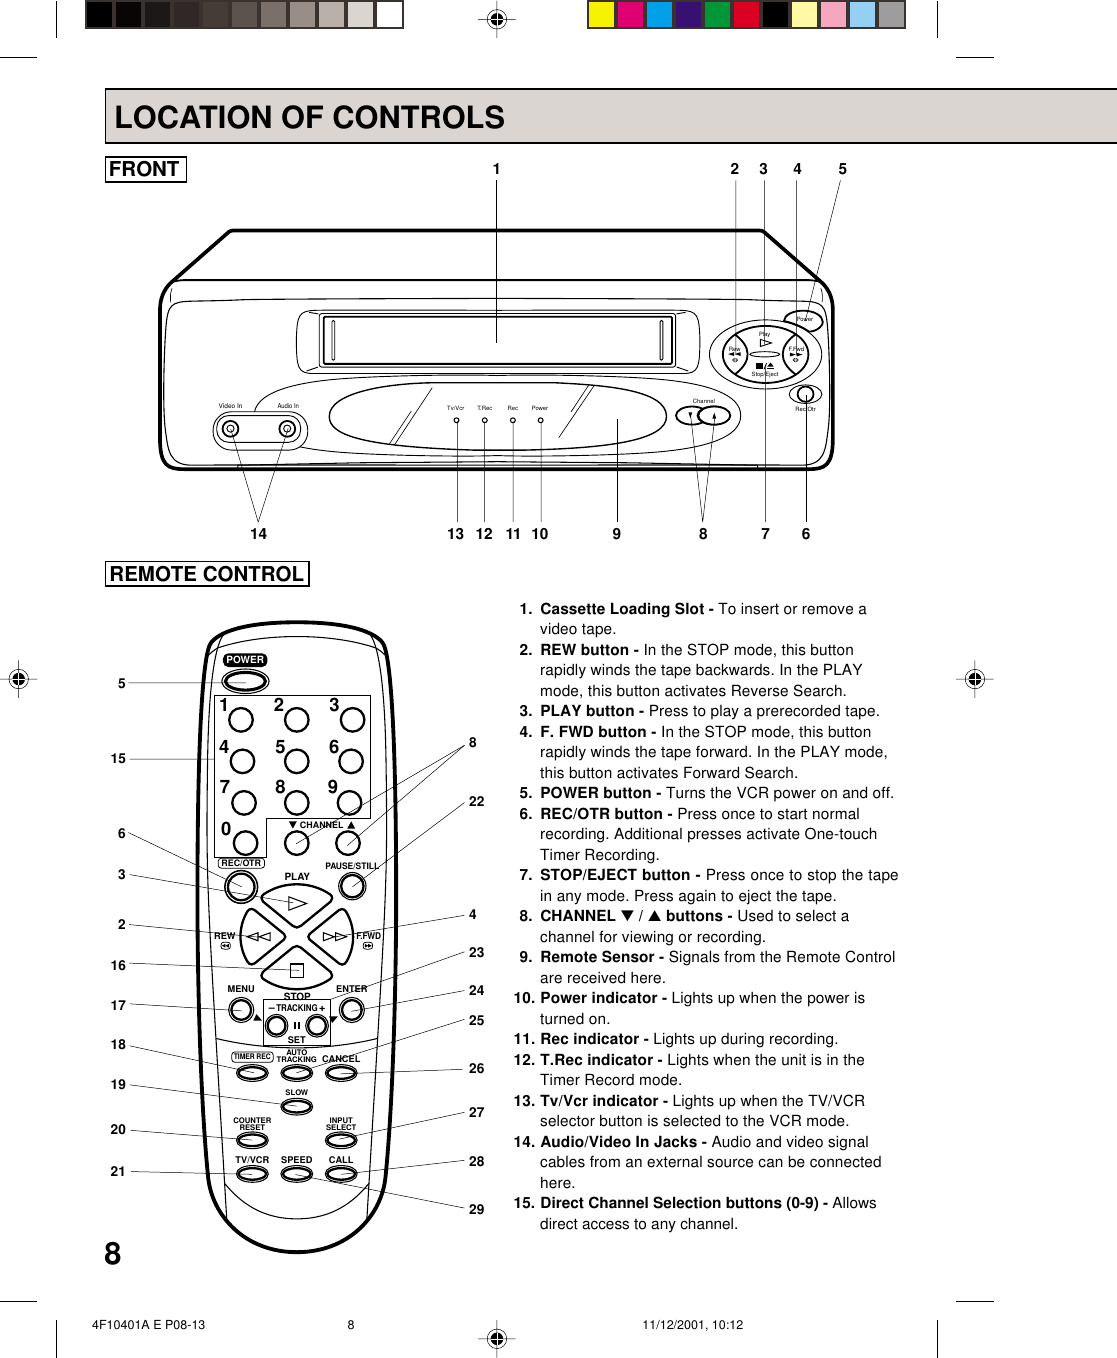 8TV/VCR SPEEDMENUREWREC/OTRPAUSE/STILLCHANNELF.FWDSETENTERSTOPPLAY1234567089– TRACKING +CALLCANCELCOUNTERRESETAUTOTRACKINGSLOWTIMER RECINPUTSELECTPOWERFRONTLOCATION OF CONTROLSREMOTE CONTROL826254221. Cassette Loading Slot - To insert or remove avideo tape.2. REW button - In the STOP mode, this buttonrapidly winds the tape backwards. In the PLAYmode, this button activates Reverse Search.3. PLAY button - Press to play a prerecorded tape.4. F. FWD button - In the STOP mode, this buttonrapidly winds the tape forward. In the PLAY mode,this button activates Forward Search.5. POWER button - Turns the VCR power on and off.6. REC/OTR button - Press once to start normalrecording. Additional presses activate One-touchTimer Recording.7. STOP/EJECT button - Press once to stop the tapein any mode. Press again to eject the tape.8. CHANNEL ▼ / ▲ buttons - Used to select achannel for viewing or recording.9. Remote Sensor - Signals from the Remote Controlare received here.10. Power indicator - Lights up when the power isturned on.11. Rec indicator - Lights up during recording.12. T.Rec indicator - Lights when the unit is in theTimer Record mode.13. Tv/Vcr indicator - Lights up when the TV/VCRselector button is selected to the VCR mode.14. Audio/Video In Jacks - Audio and video signalcables from an external source can be connectedhere.15. Direct Channel Selection buttons (0-9) - Allowsdirect access to any channel.2451563216181917272829202123PowerRec/OtrChannelPowerTv/VcrAudio InVideo InRecT.RecPlayRew F.FwdStop/Eject113 12 11 10 914 6853 427  4F10401A E P08-13 11/12/2001, 10:128